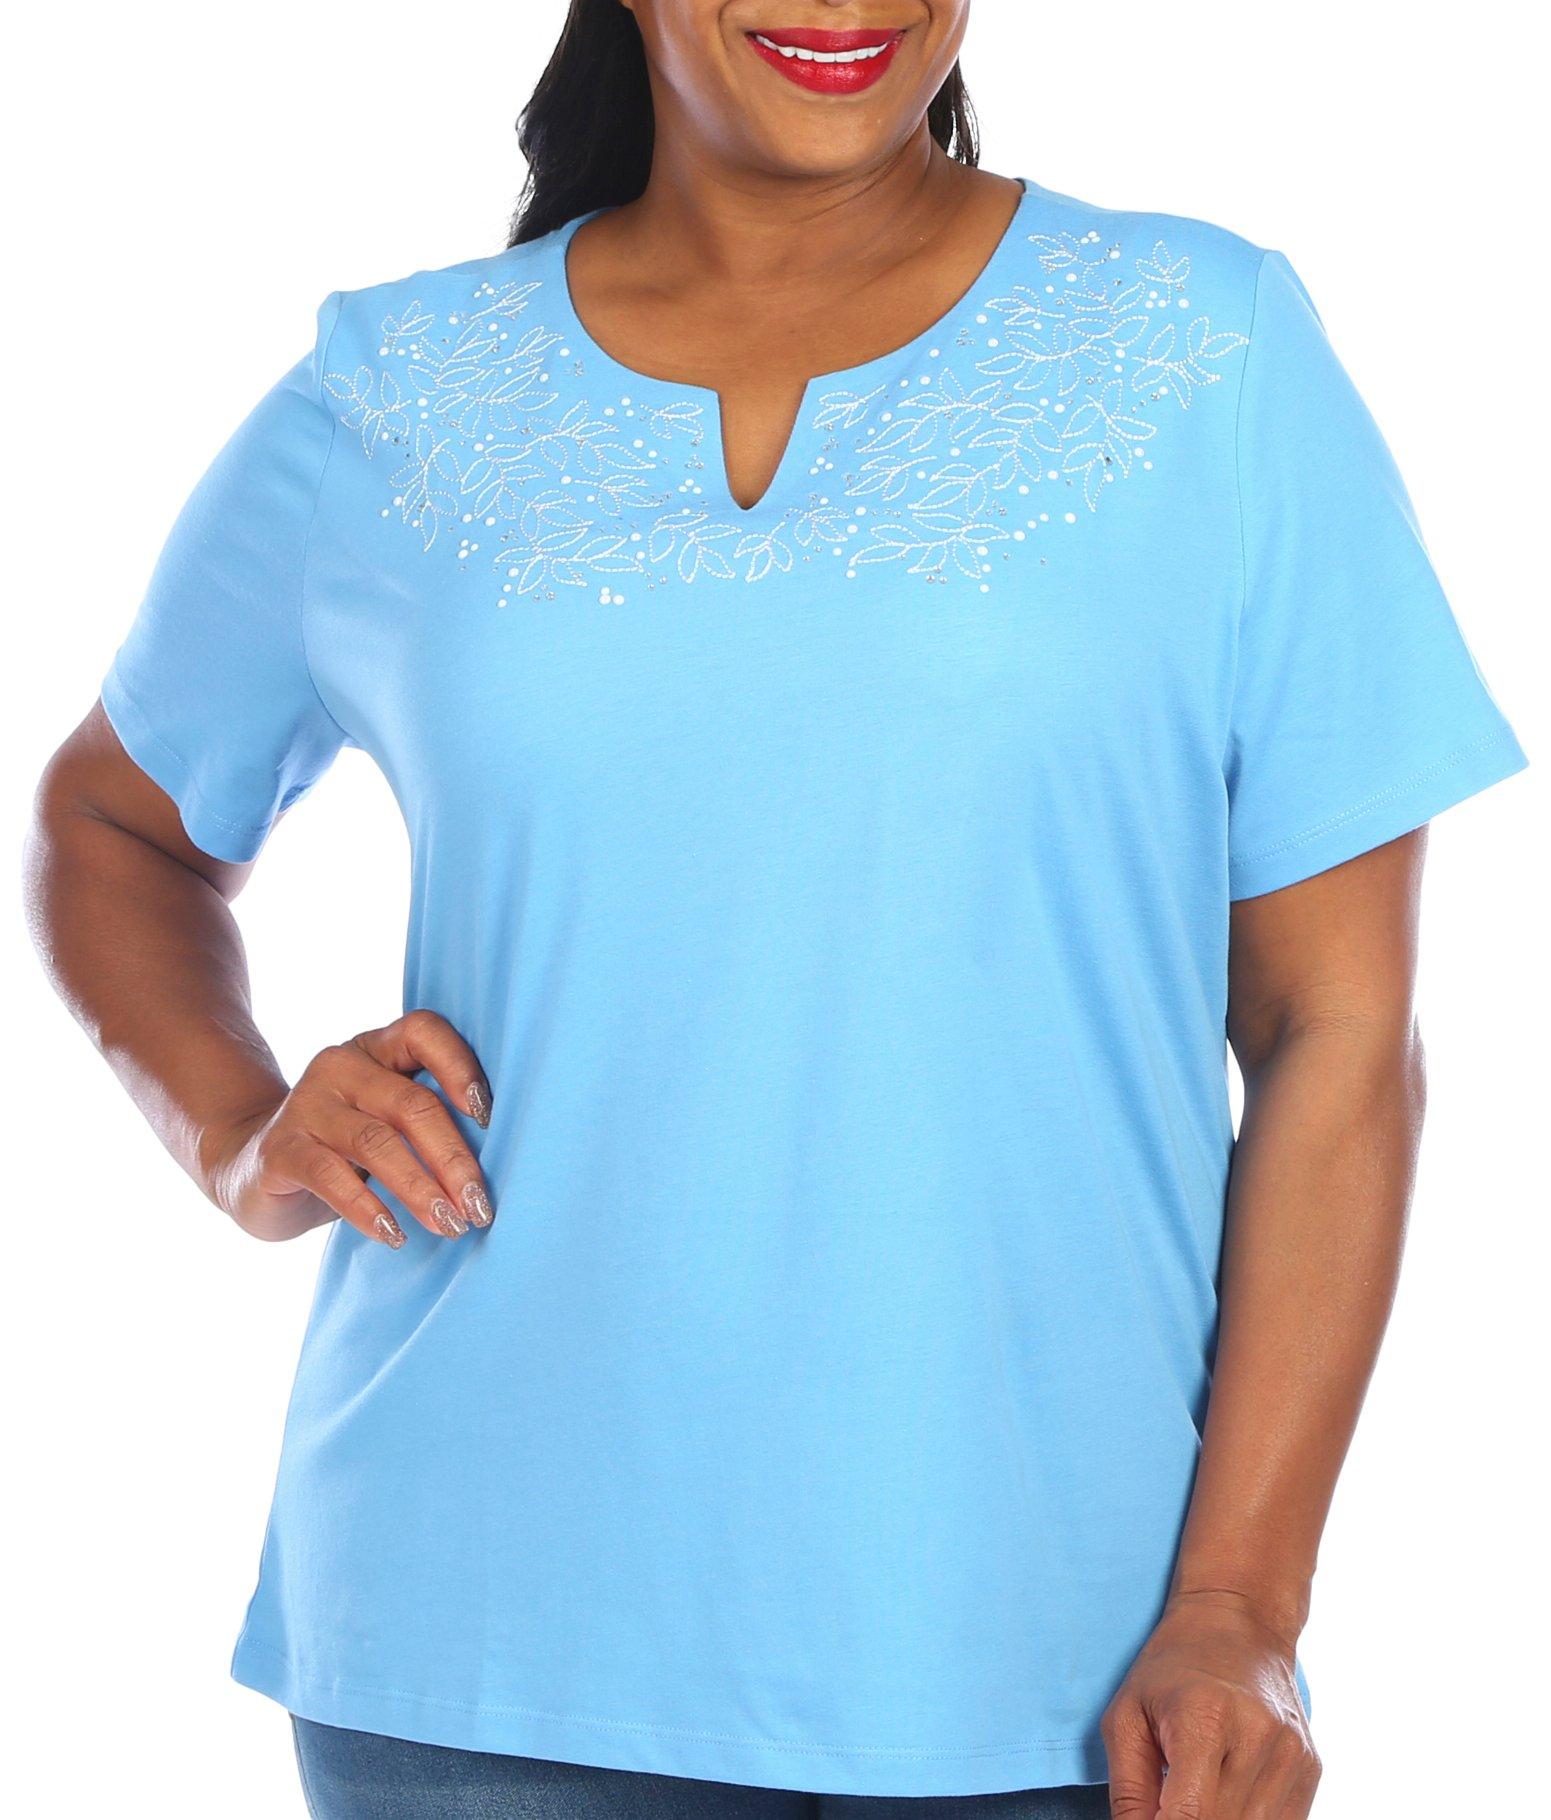 Coral Bay Plus Embroidered Notch Neck Short Sleeve Top